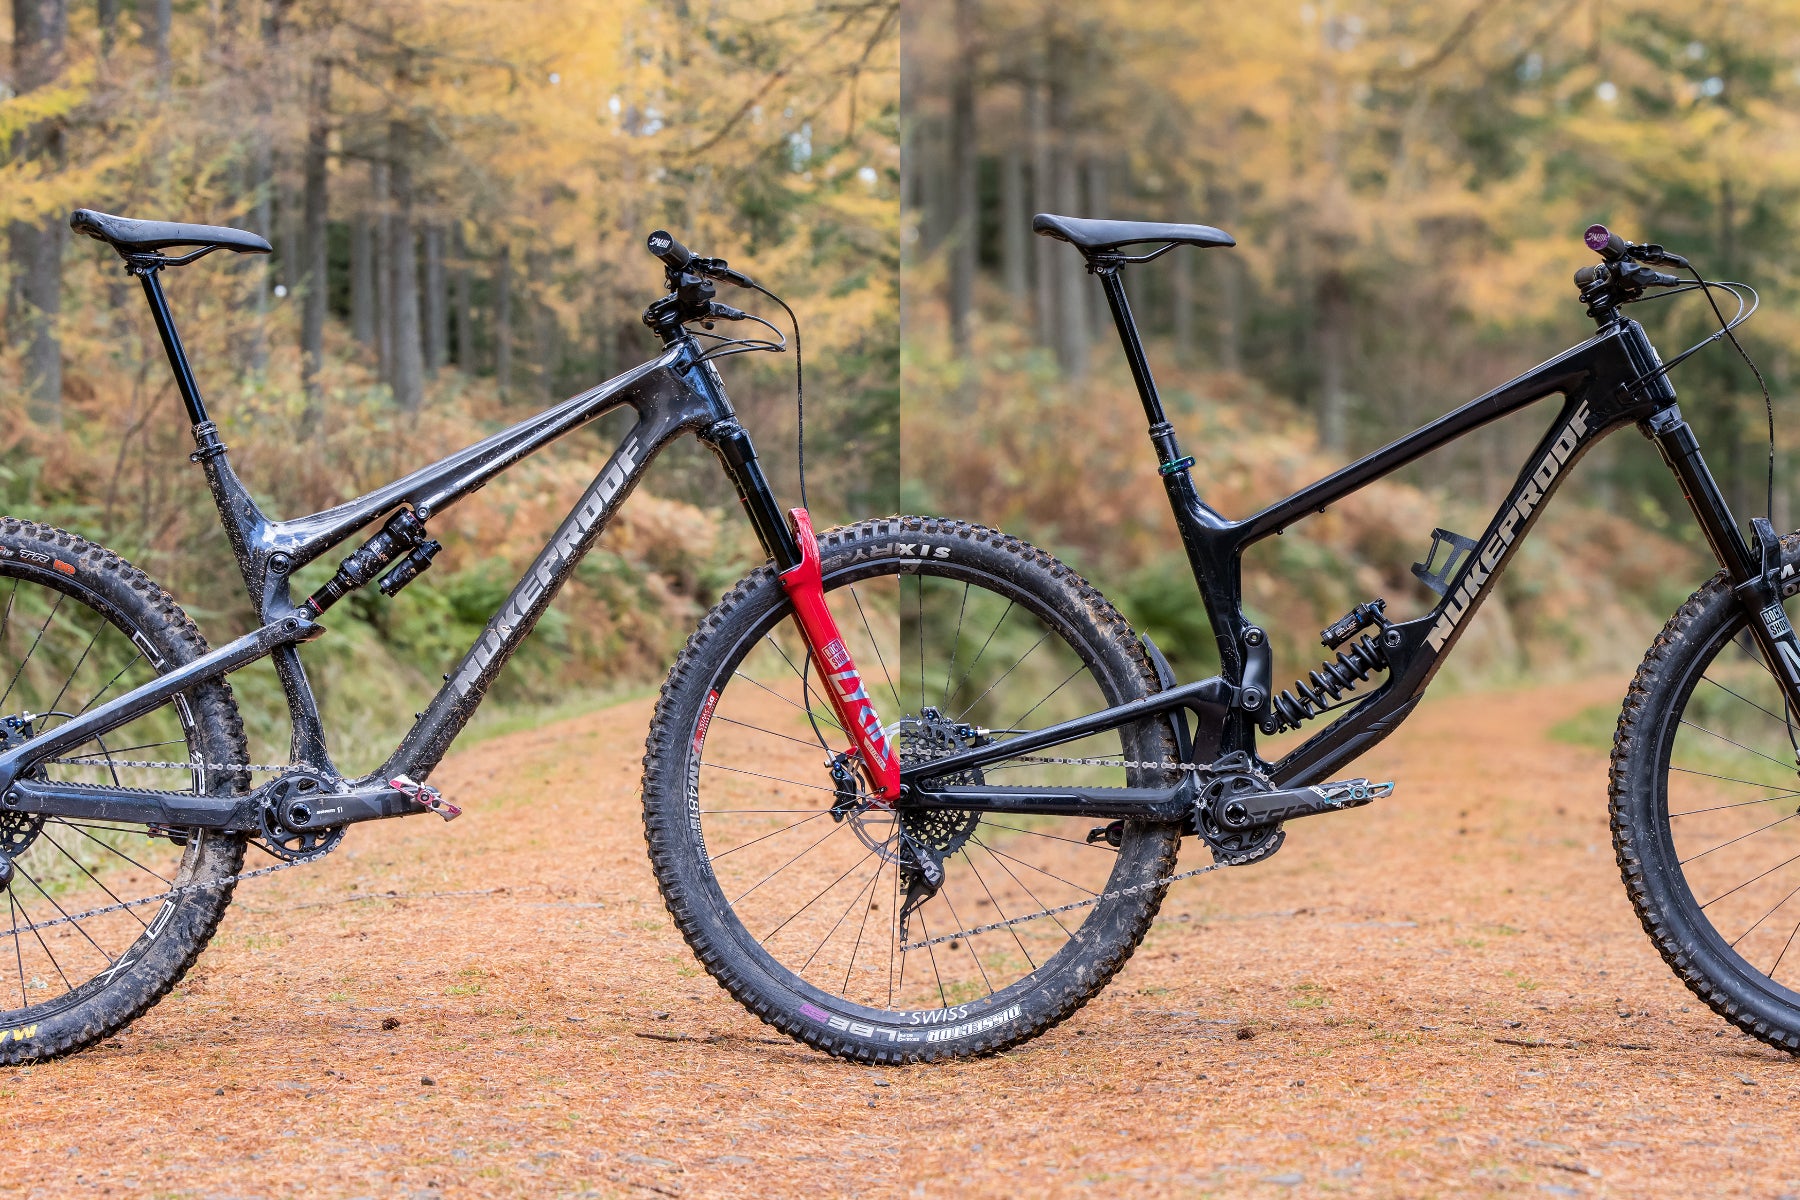 Short or Long Travel: Which Is the Best All-Around Mountain Bike?